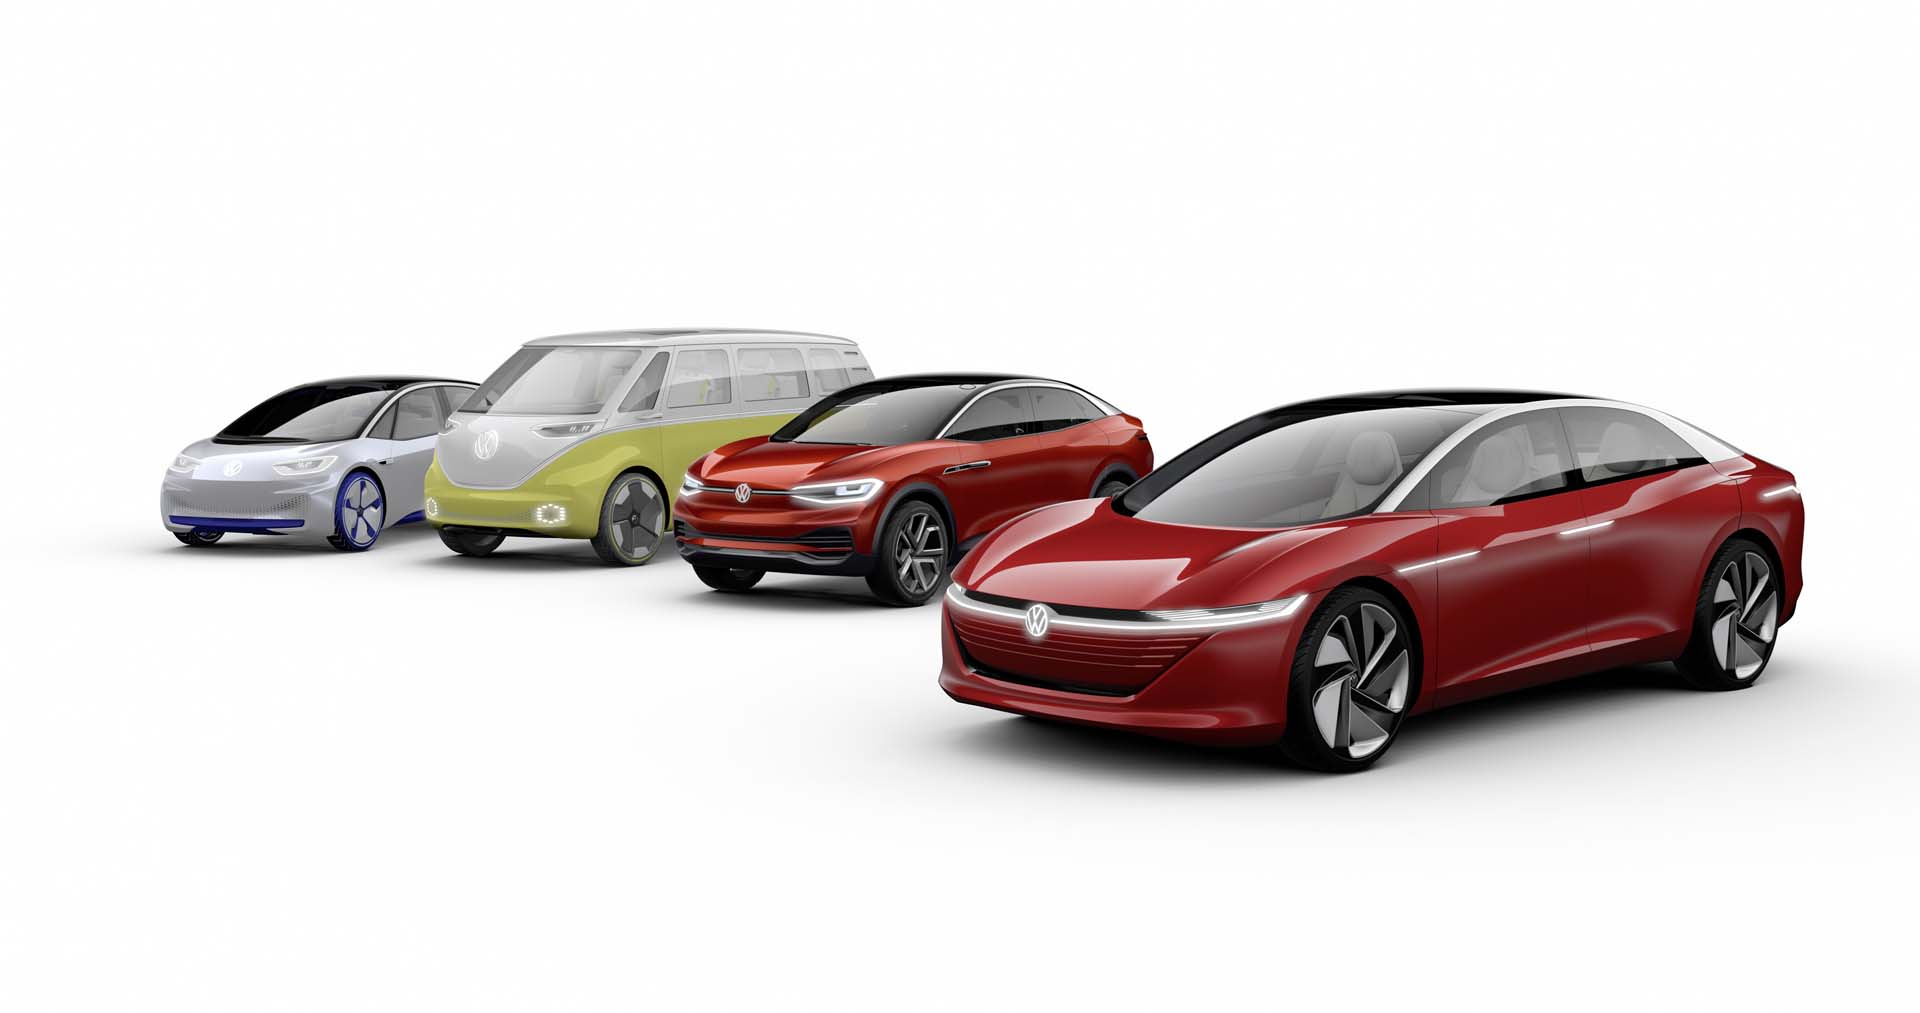 how will vw price its next generation electric vehicles think tdi